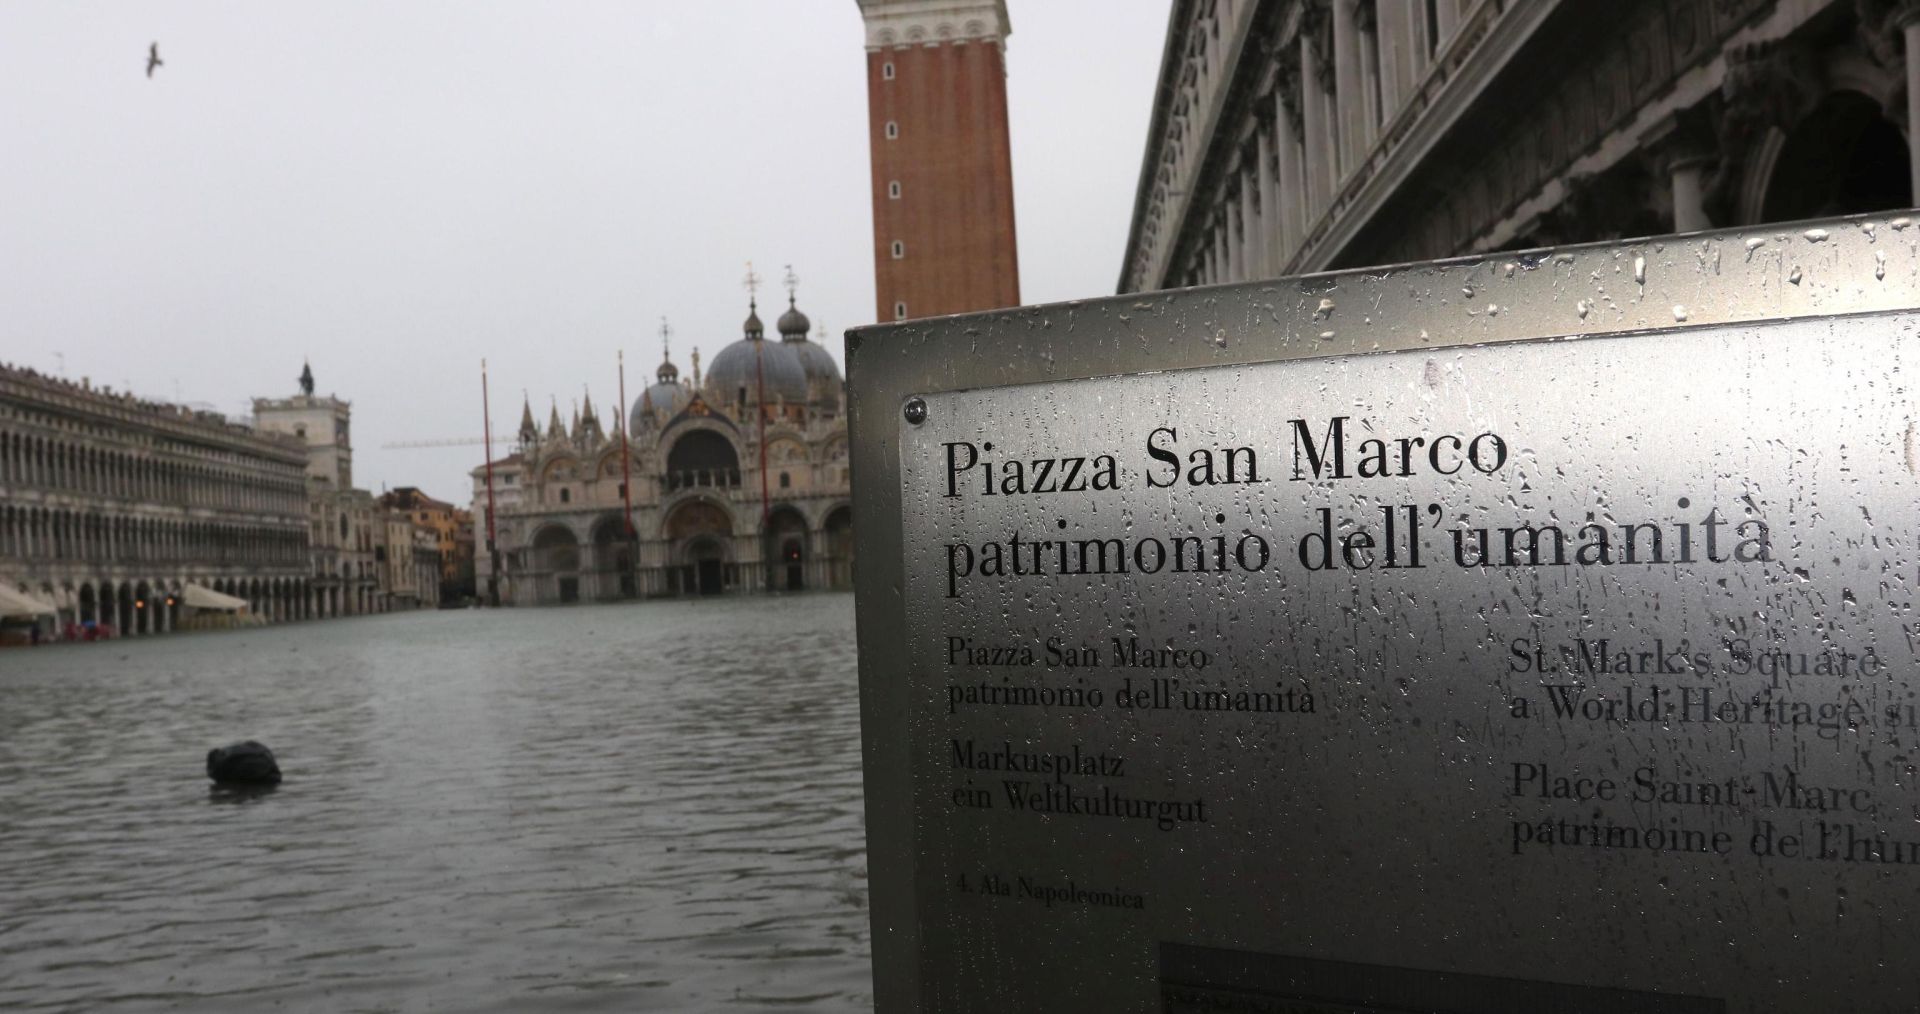 epa07999516 A view of flooded St Mark's Square during high water in Venice, northern Italy, 15 November 2019. Venice closed St Mark's Square due to fresh flooding in the city. The city is currently suffering its second-worst floods on record, with the high-water mark reaching 187cm on Tuesday. The water level had dropped down significantly but it is forecast to go back up to 160cm today.  EPA/EMILIANO CRESPI